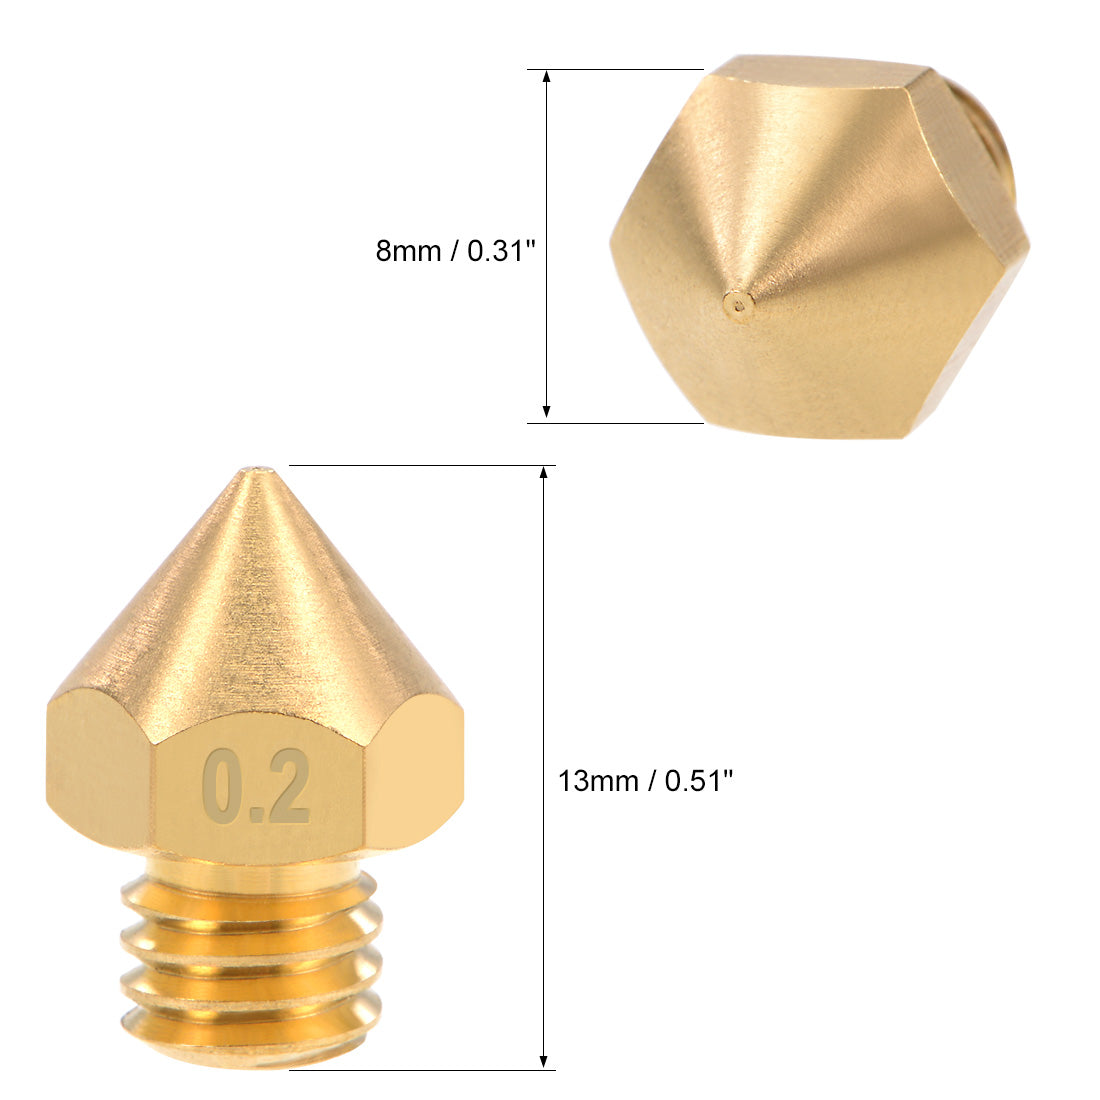 uxcell Uxcell 0.2mm 3D Printer Nozzle Head M6 for MK8 1.75mm Extruder Print, Brass 4pcs